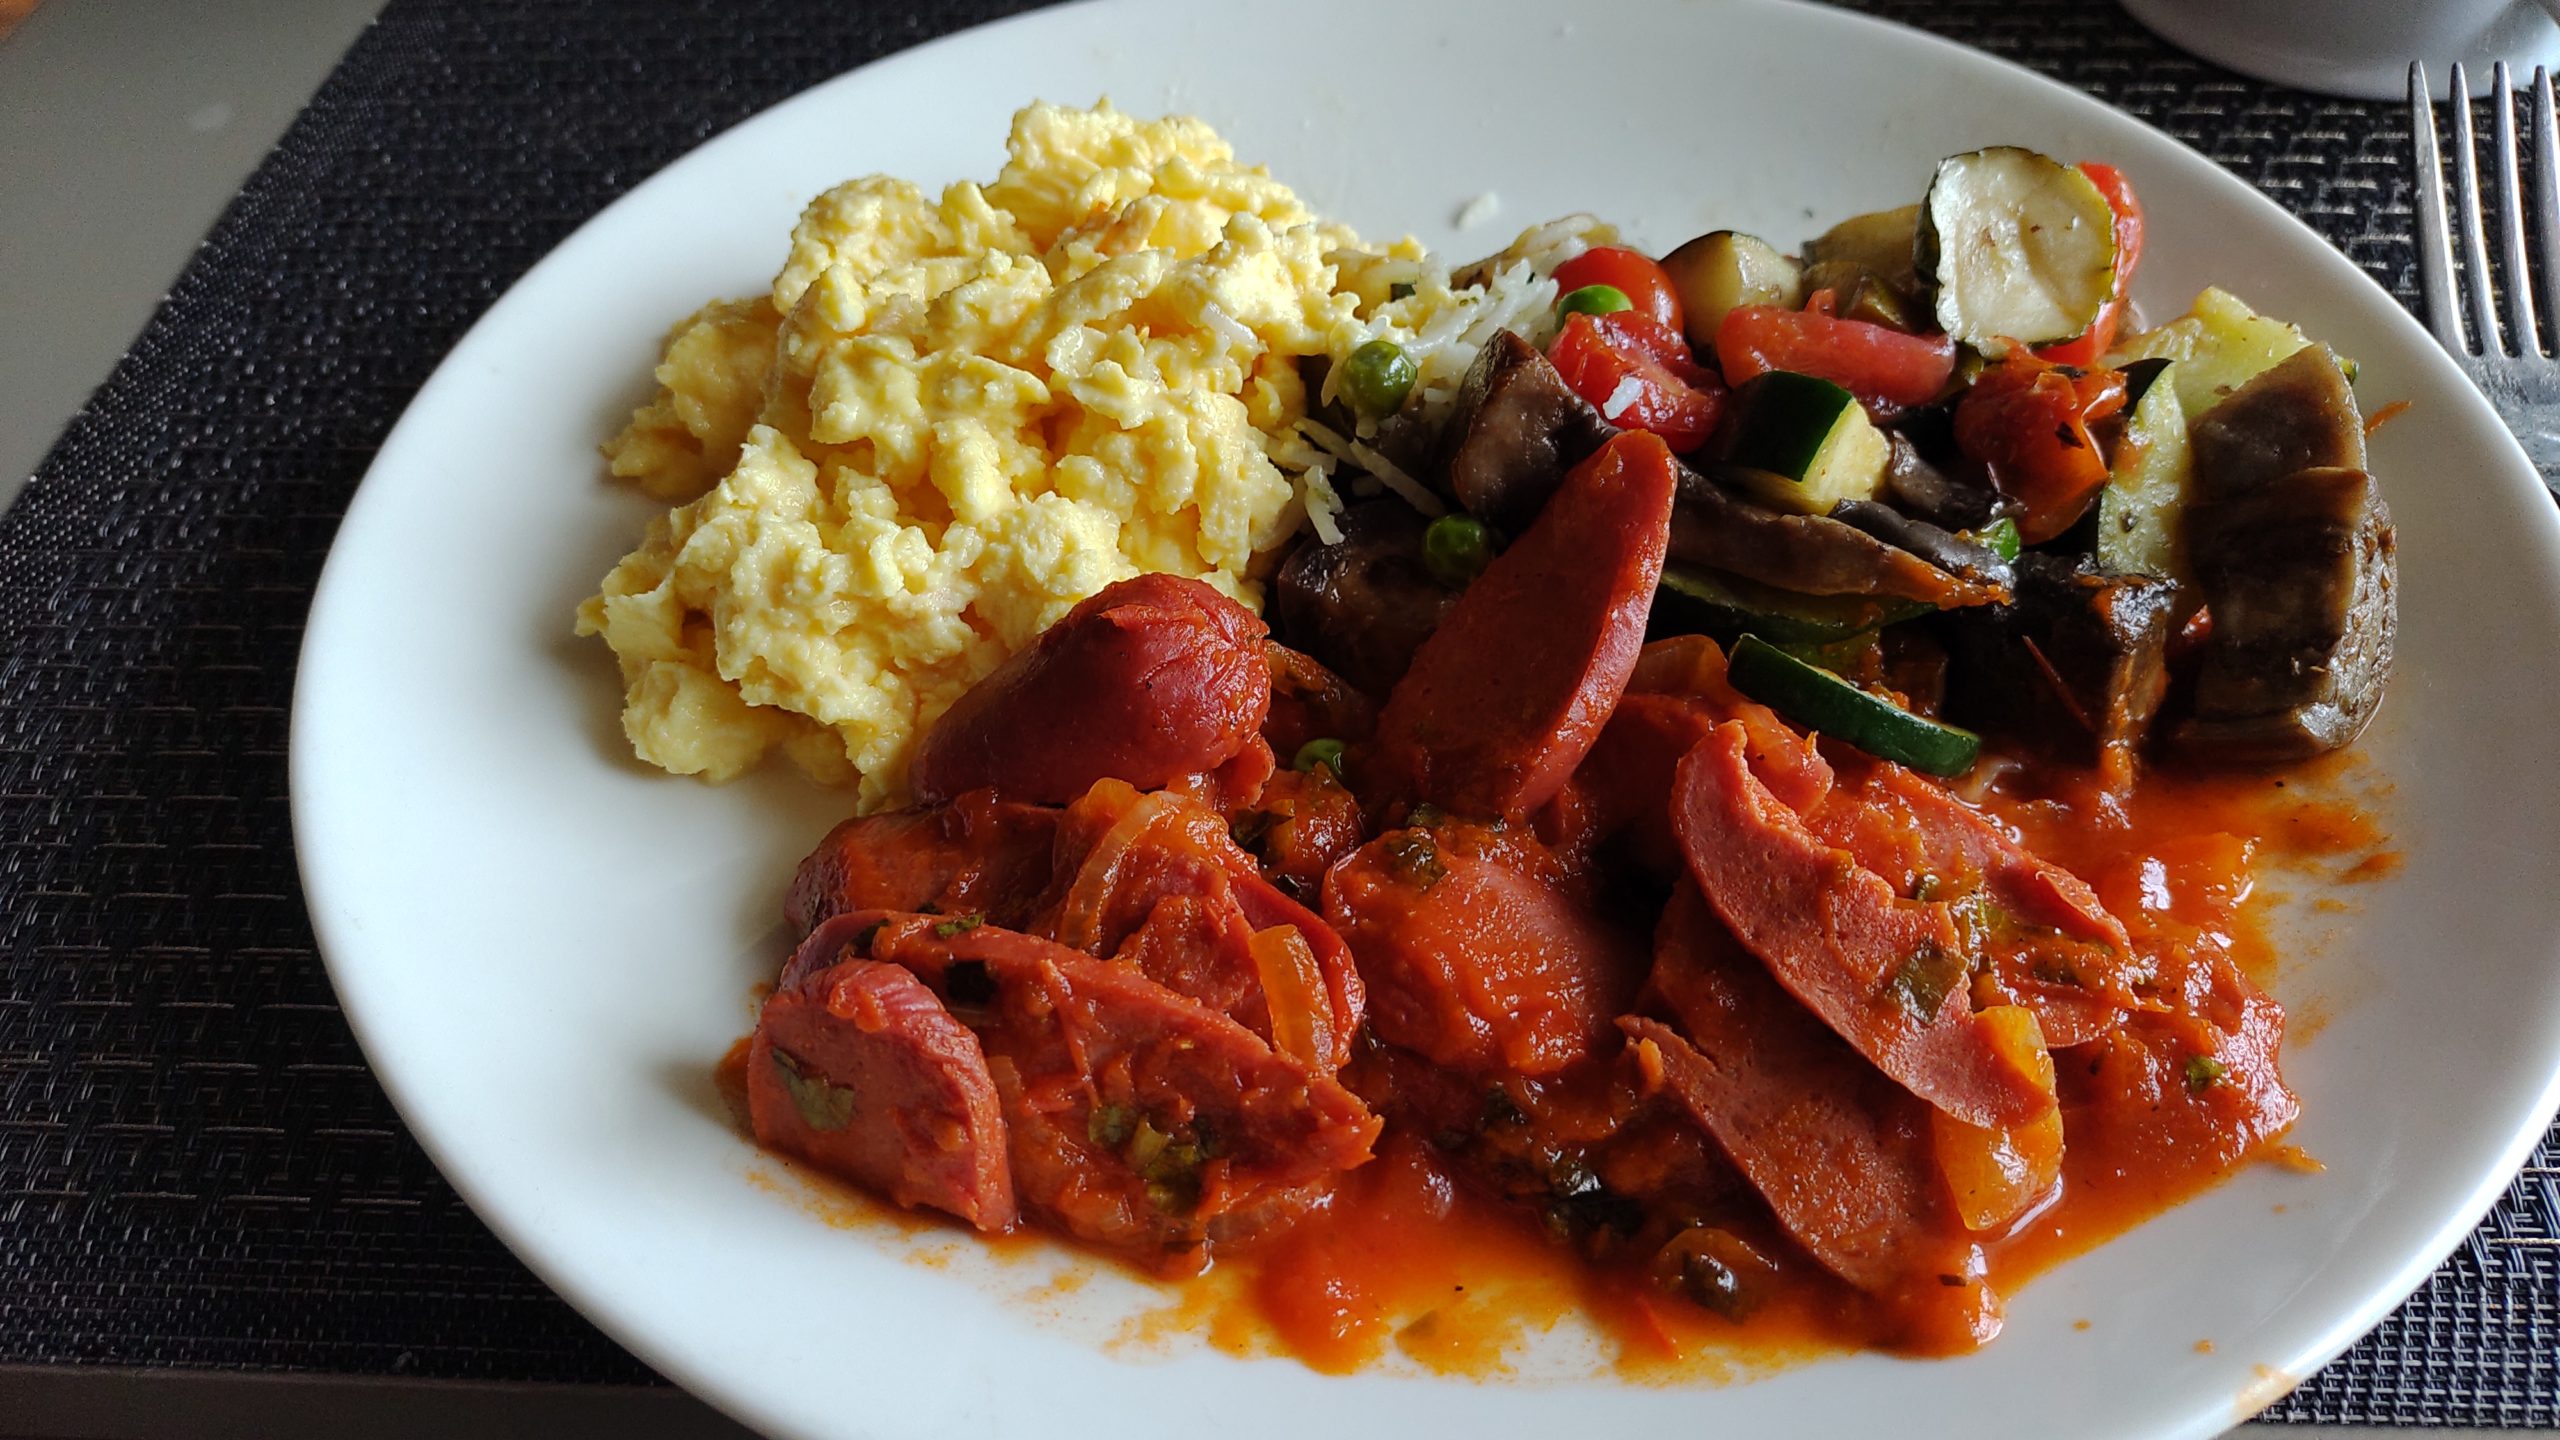 PICTURE OF A PLATE WITH STEAMED VEGETABLES, SAUSAGES  AND SCRAMBLED EGGS.